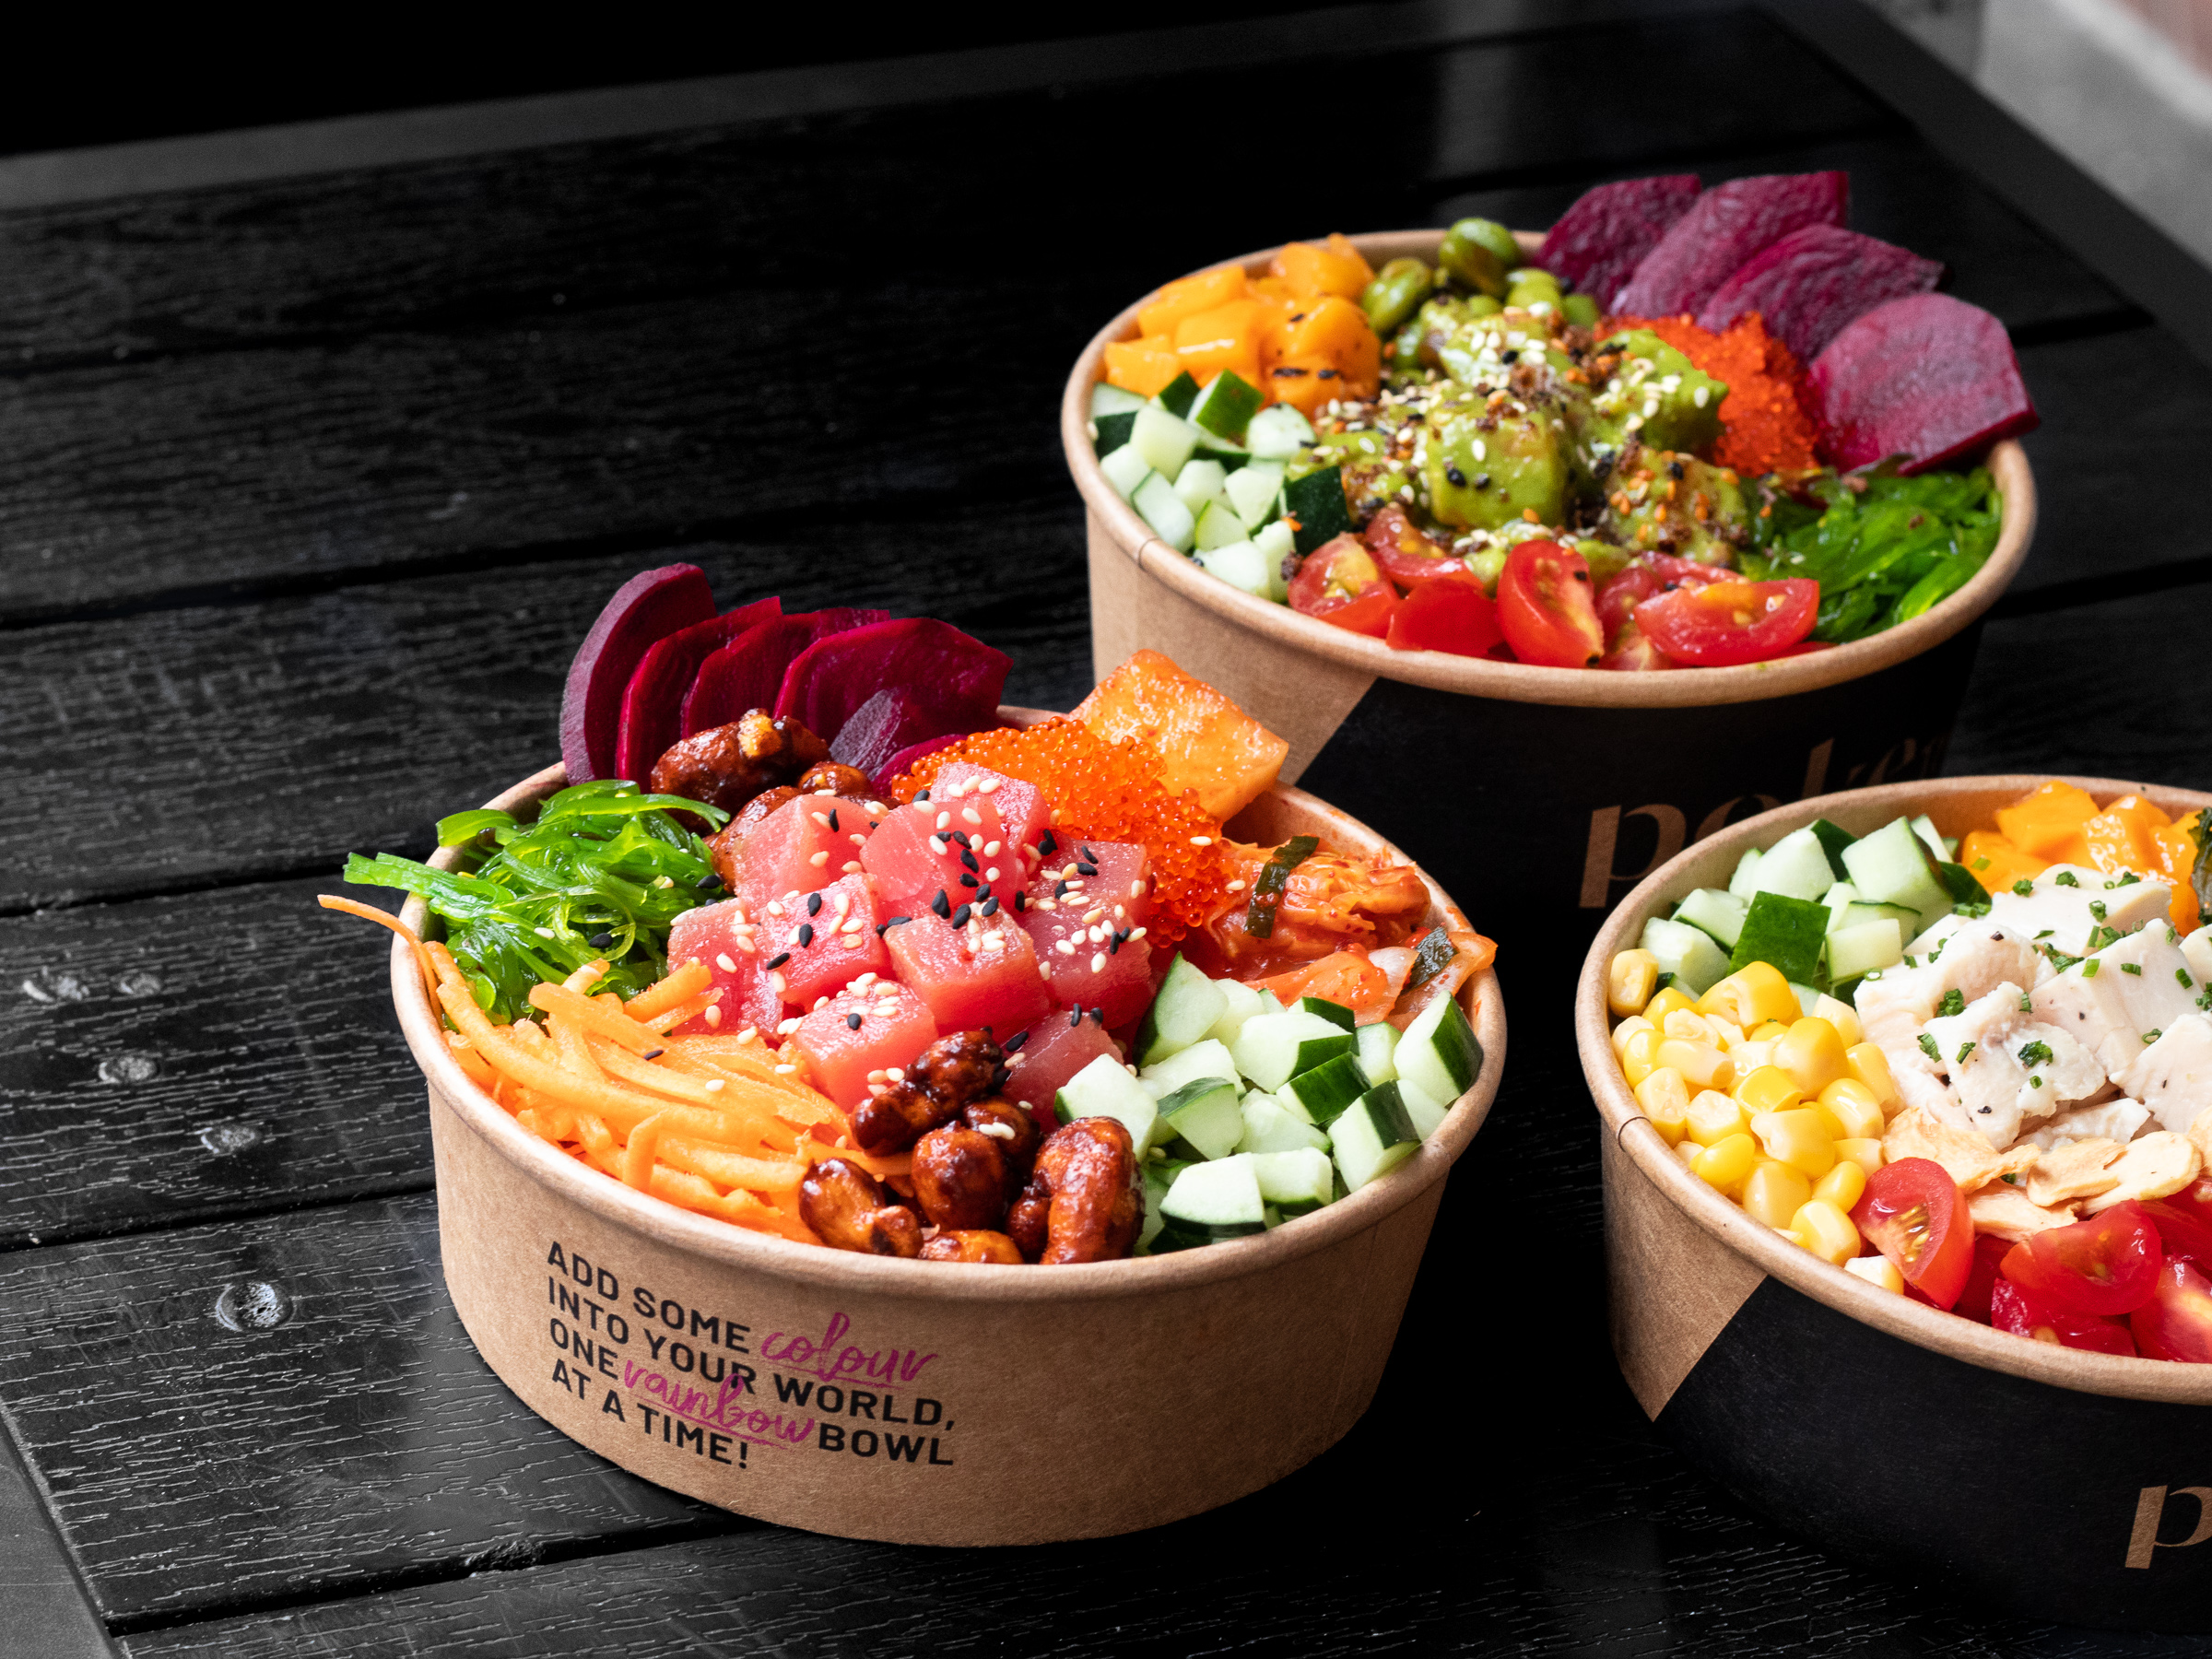 Halal food delivery from Poke Theory, delivered islandwide in Singapore powered by Oddle.